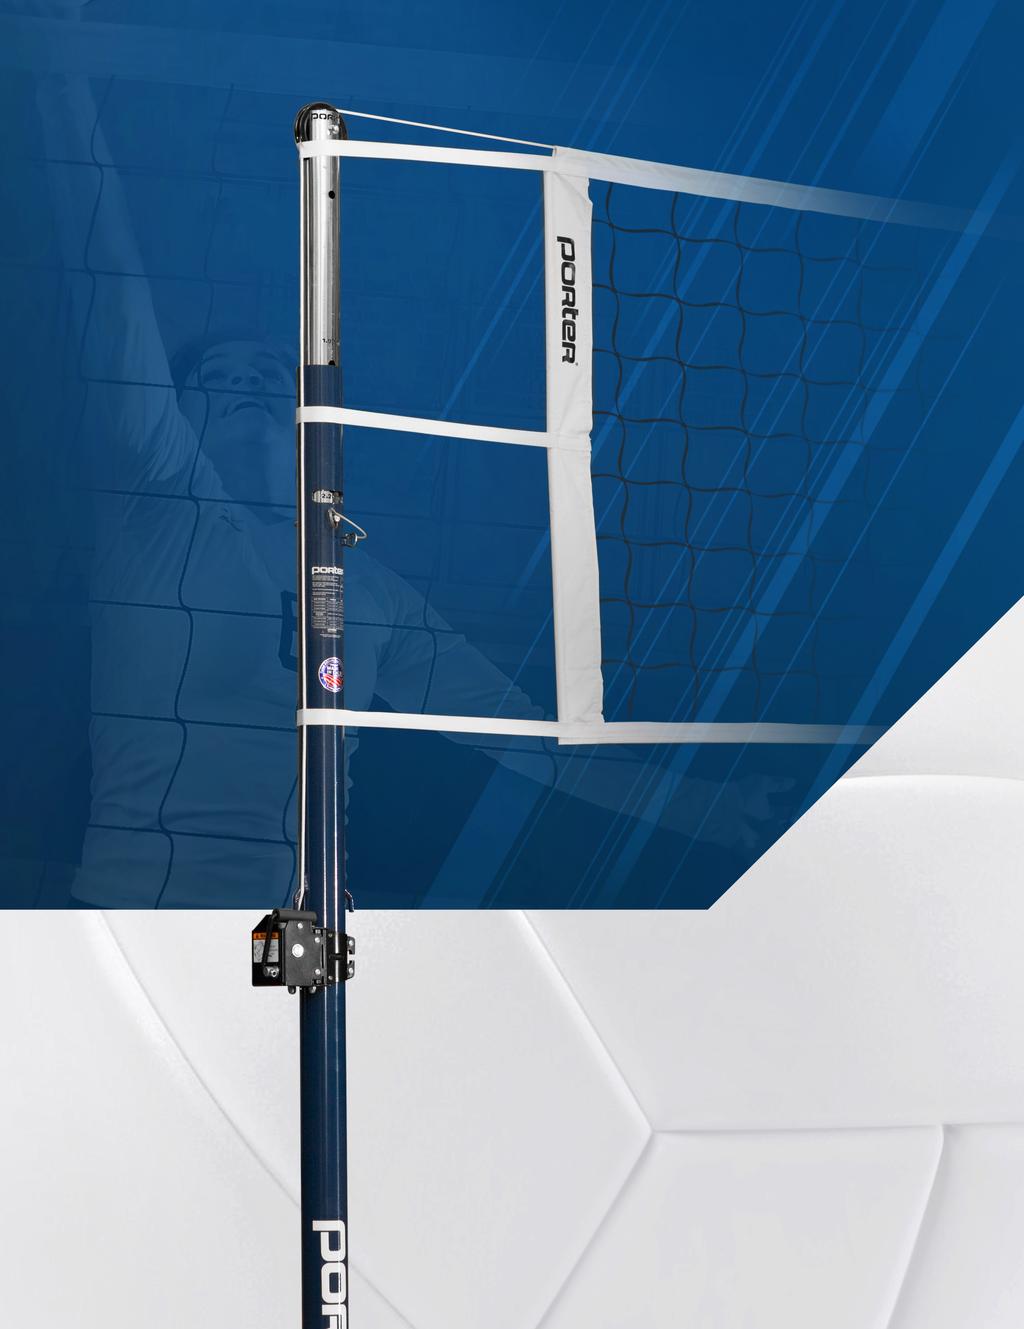 POWR STEEL Porter Powr-Steel TM standards are a combination of endless function, style, and stability. The 3 OD steel uprights are sleek, strong, and weigh less than 50 lb each.